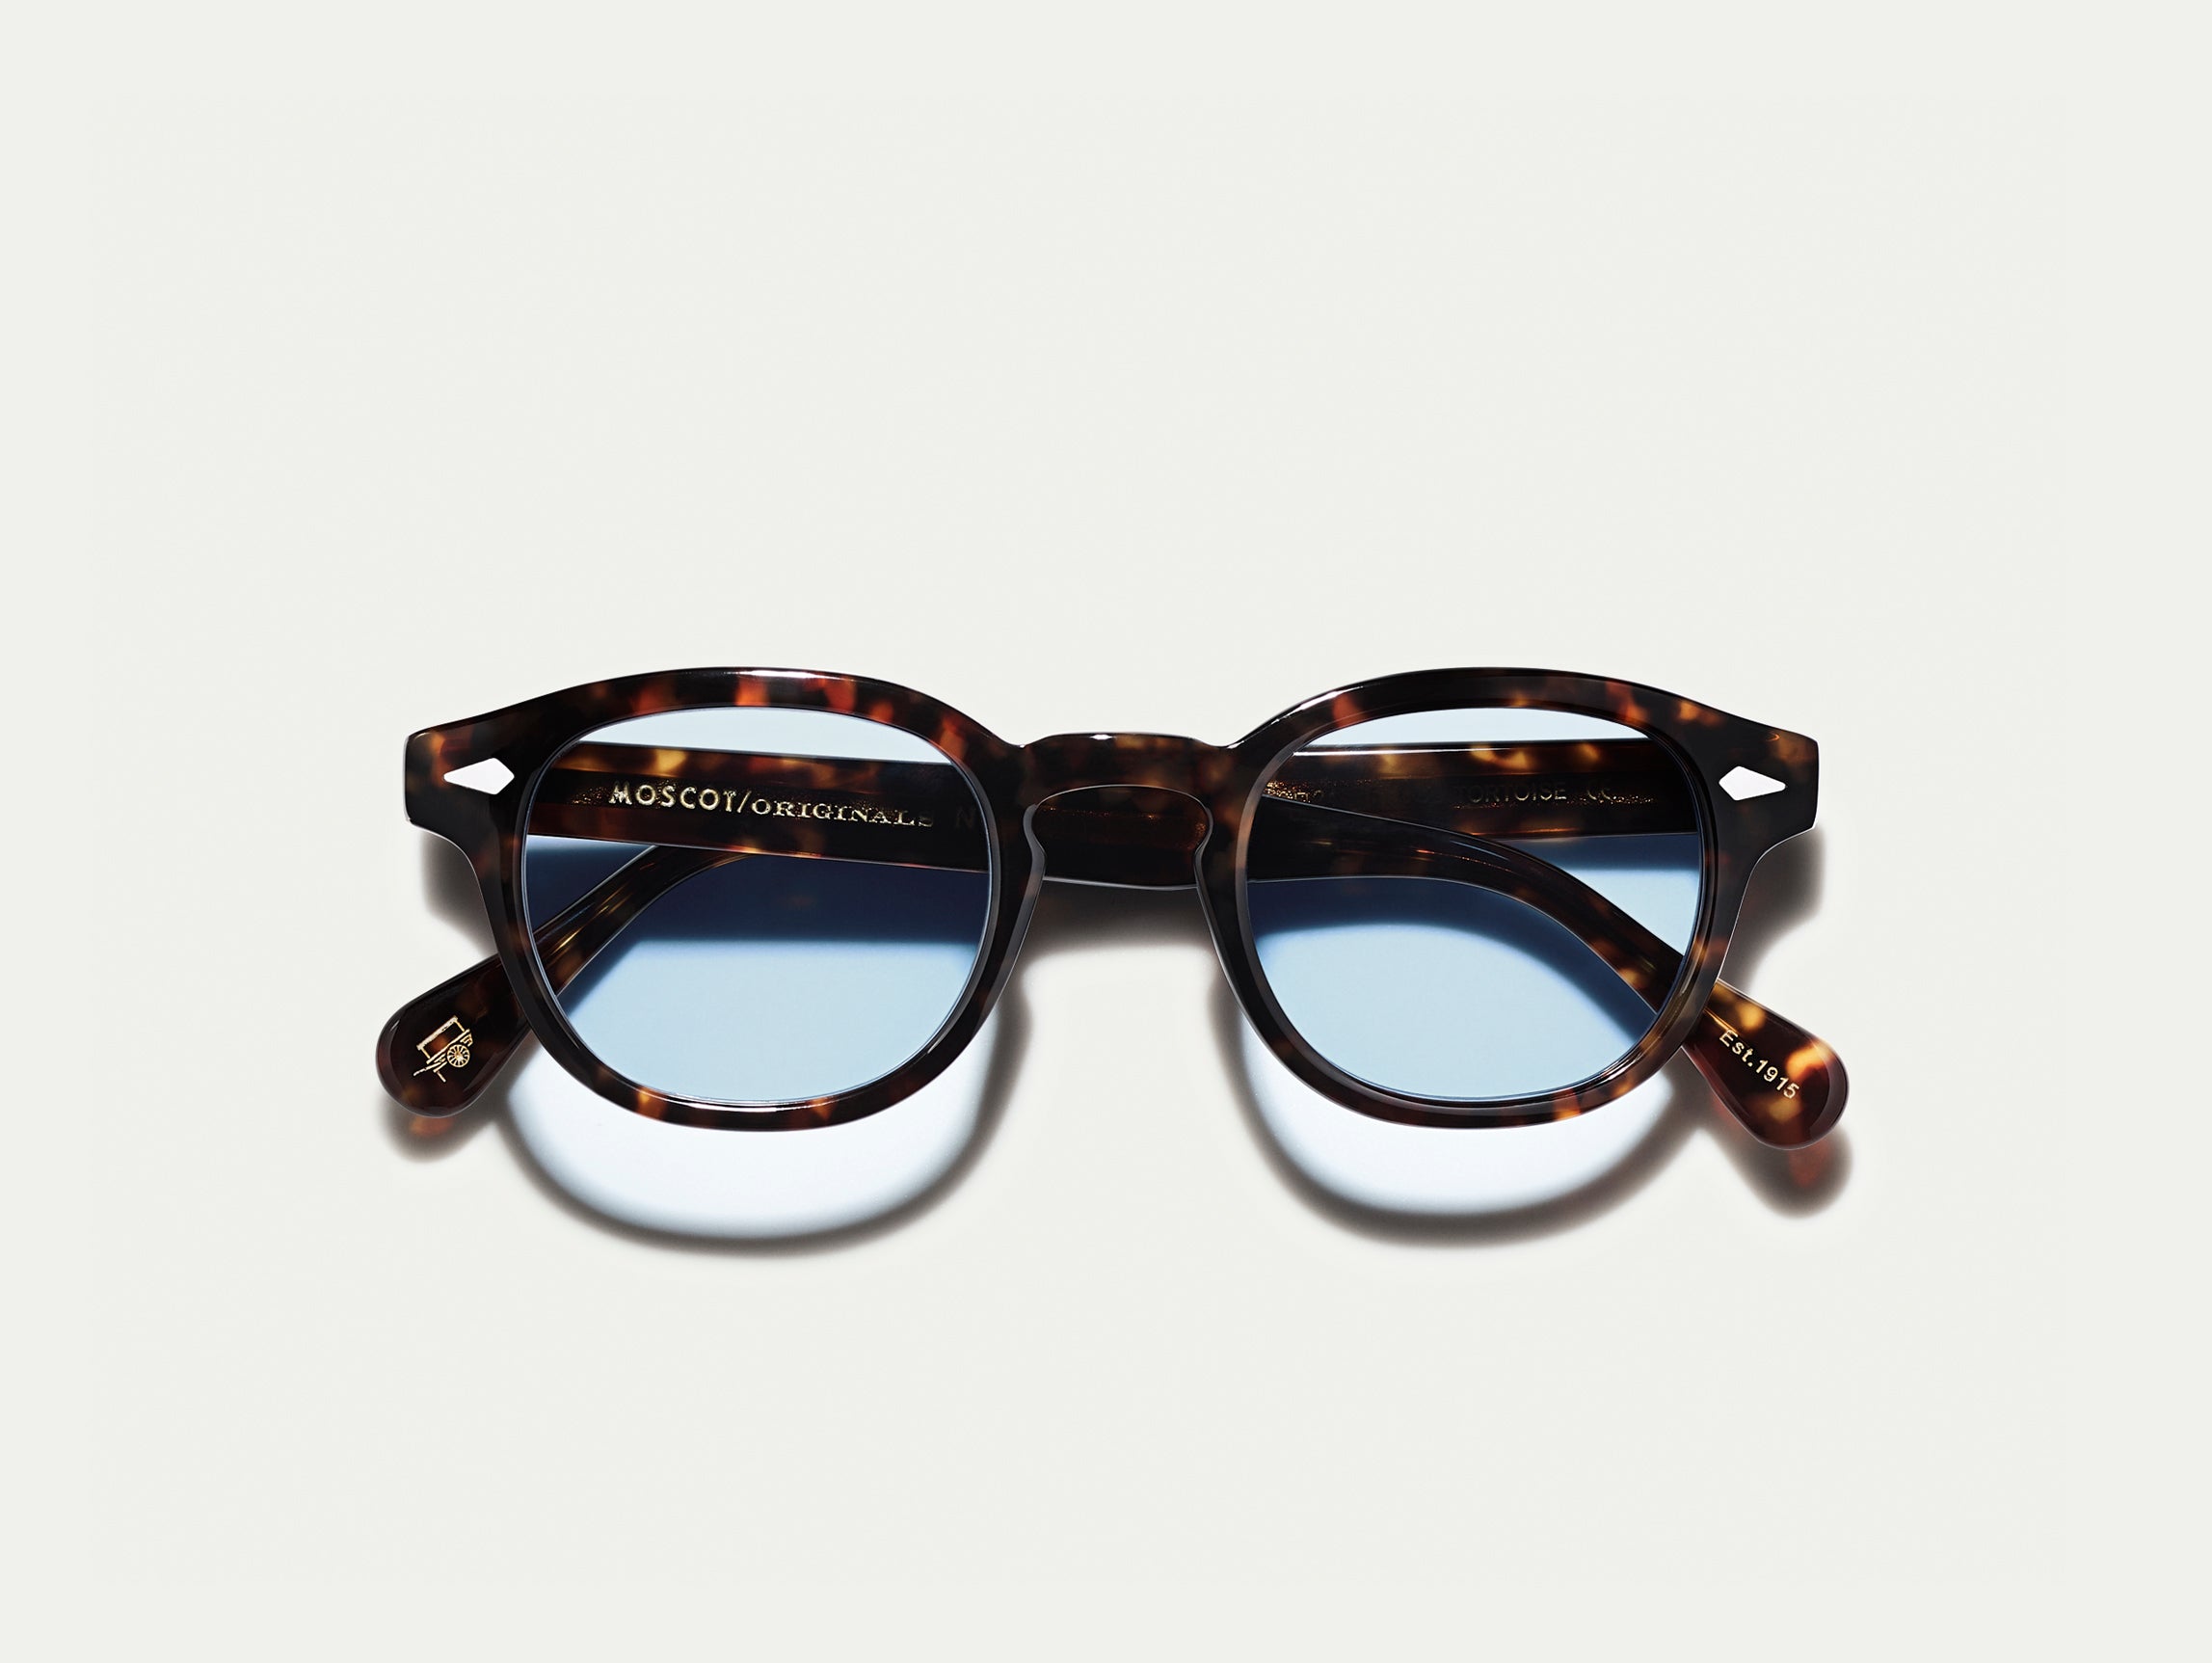 The LEMTOSH Tortoise with Bel Air Blue Tinted Lenses